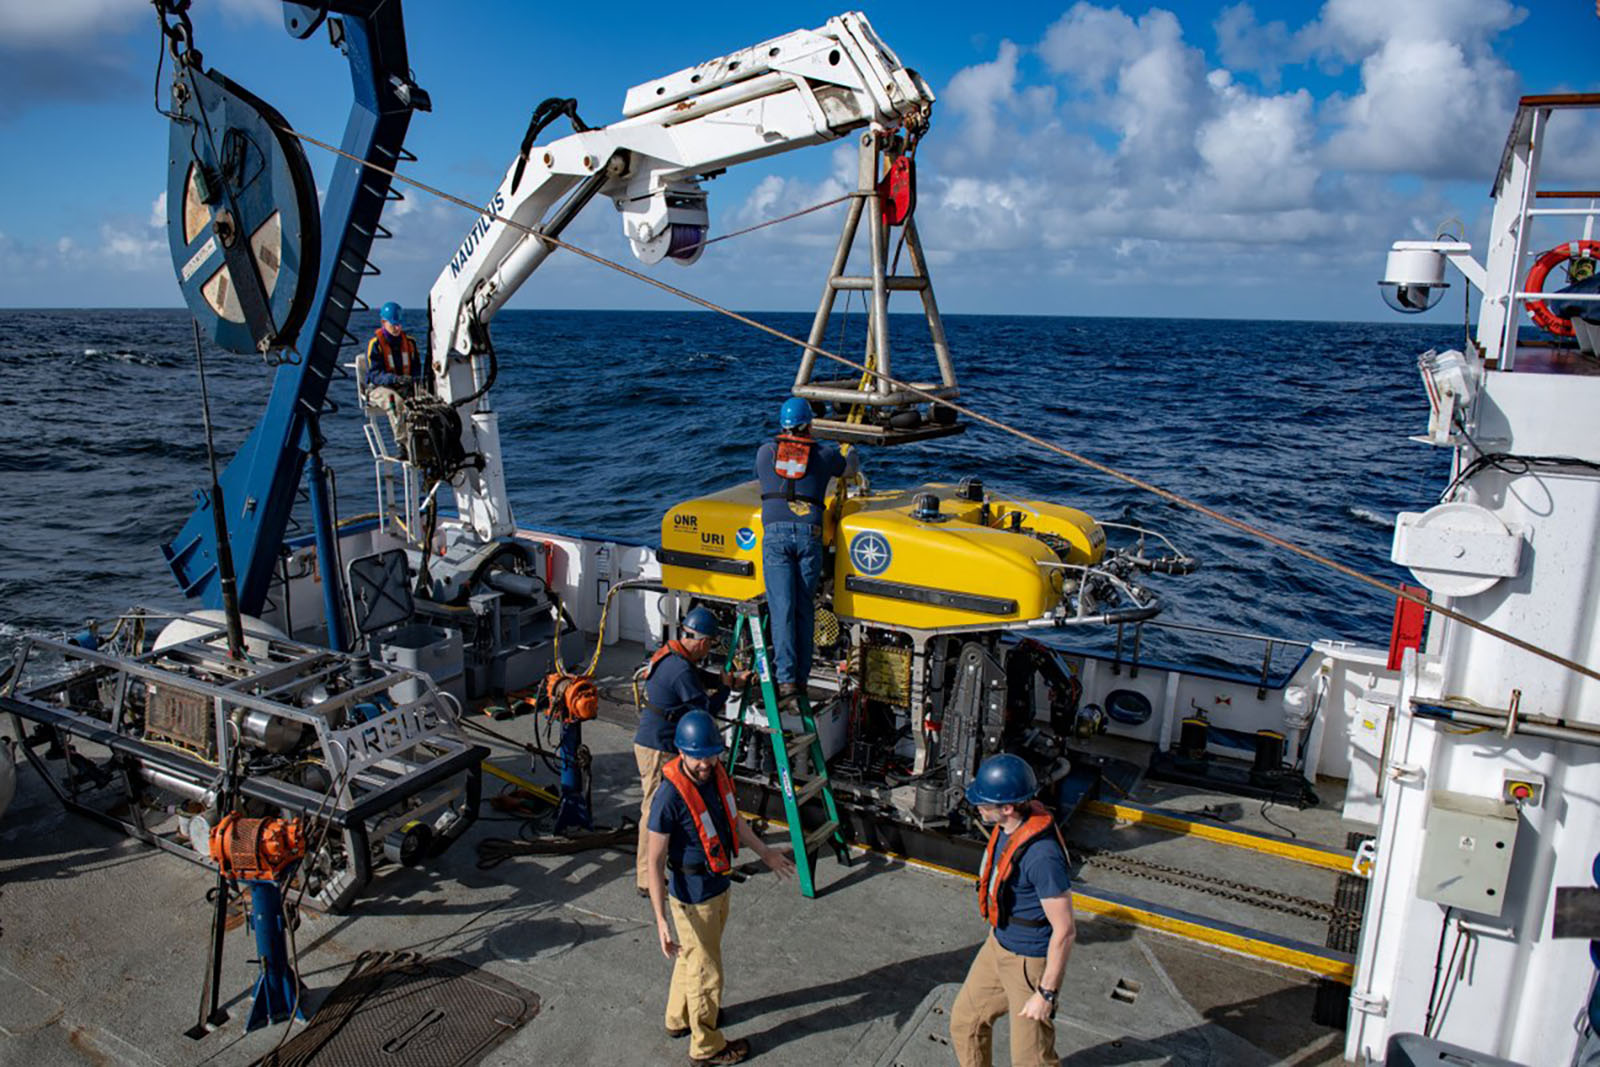 Launching of the ROV Hercules from the E/V Nautilus in its search for meteorite fragments.